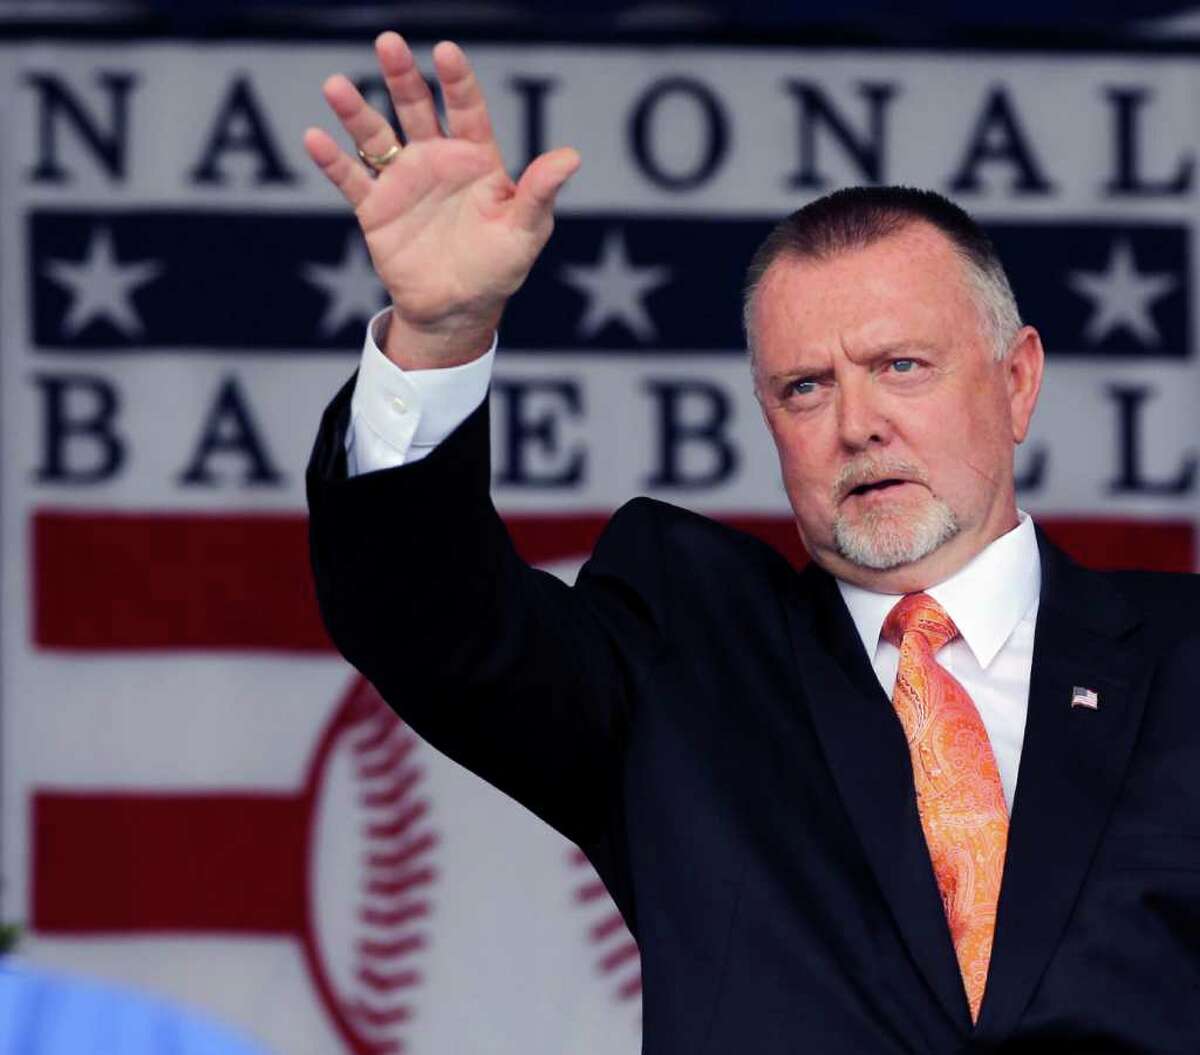 Minnesota Twins fans watch former Twins pitcher Bert Blyleven speak via  video from his induction into the National Baseball Hall of Fame during a  ceremony in Copperstown N.Y., before a baseball game